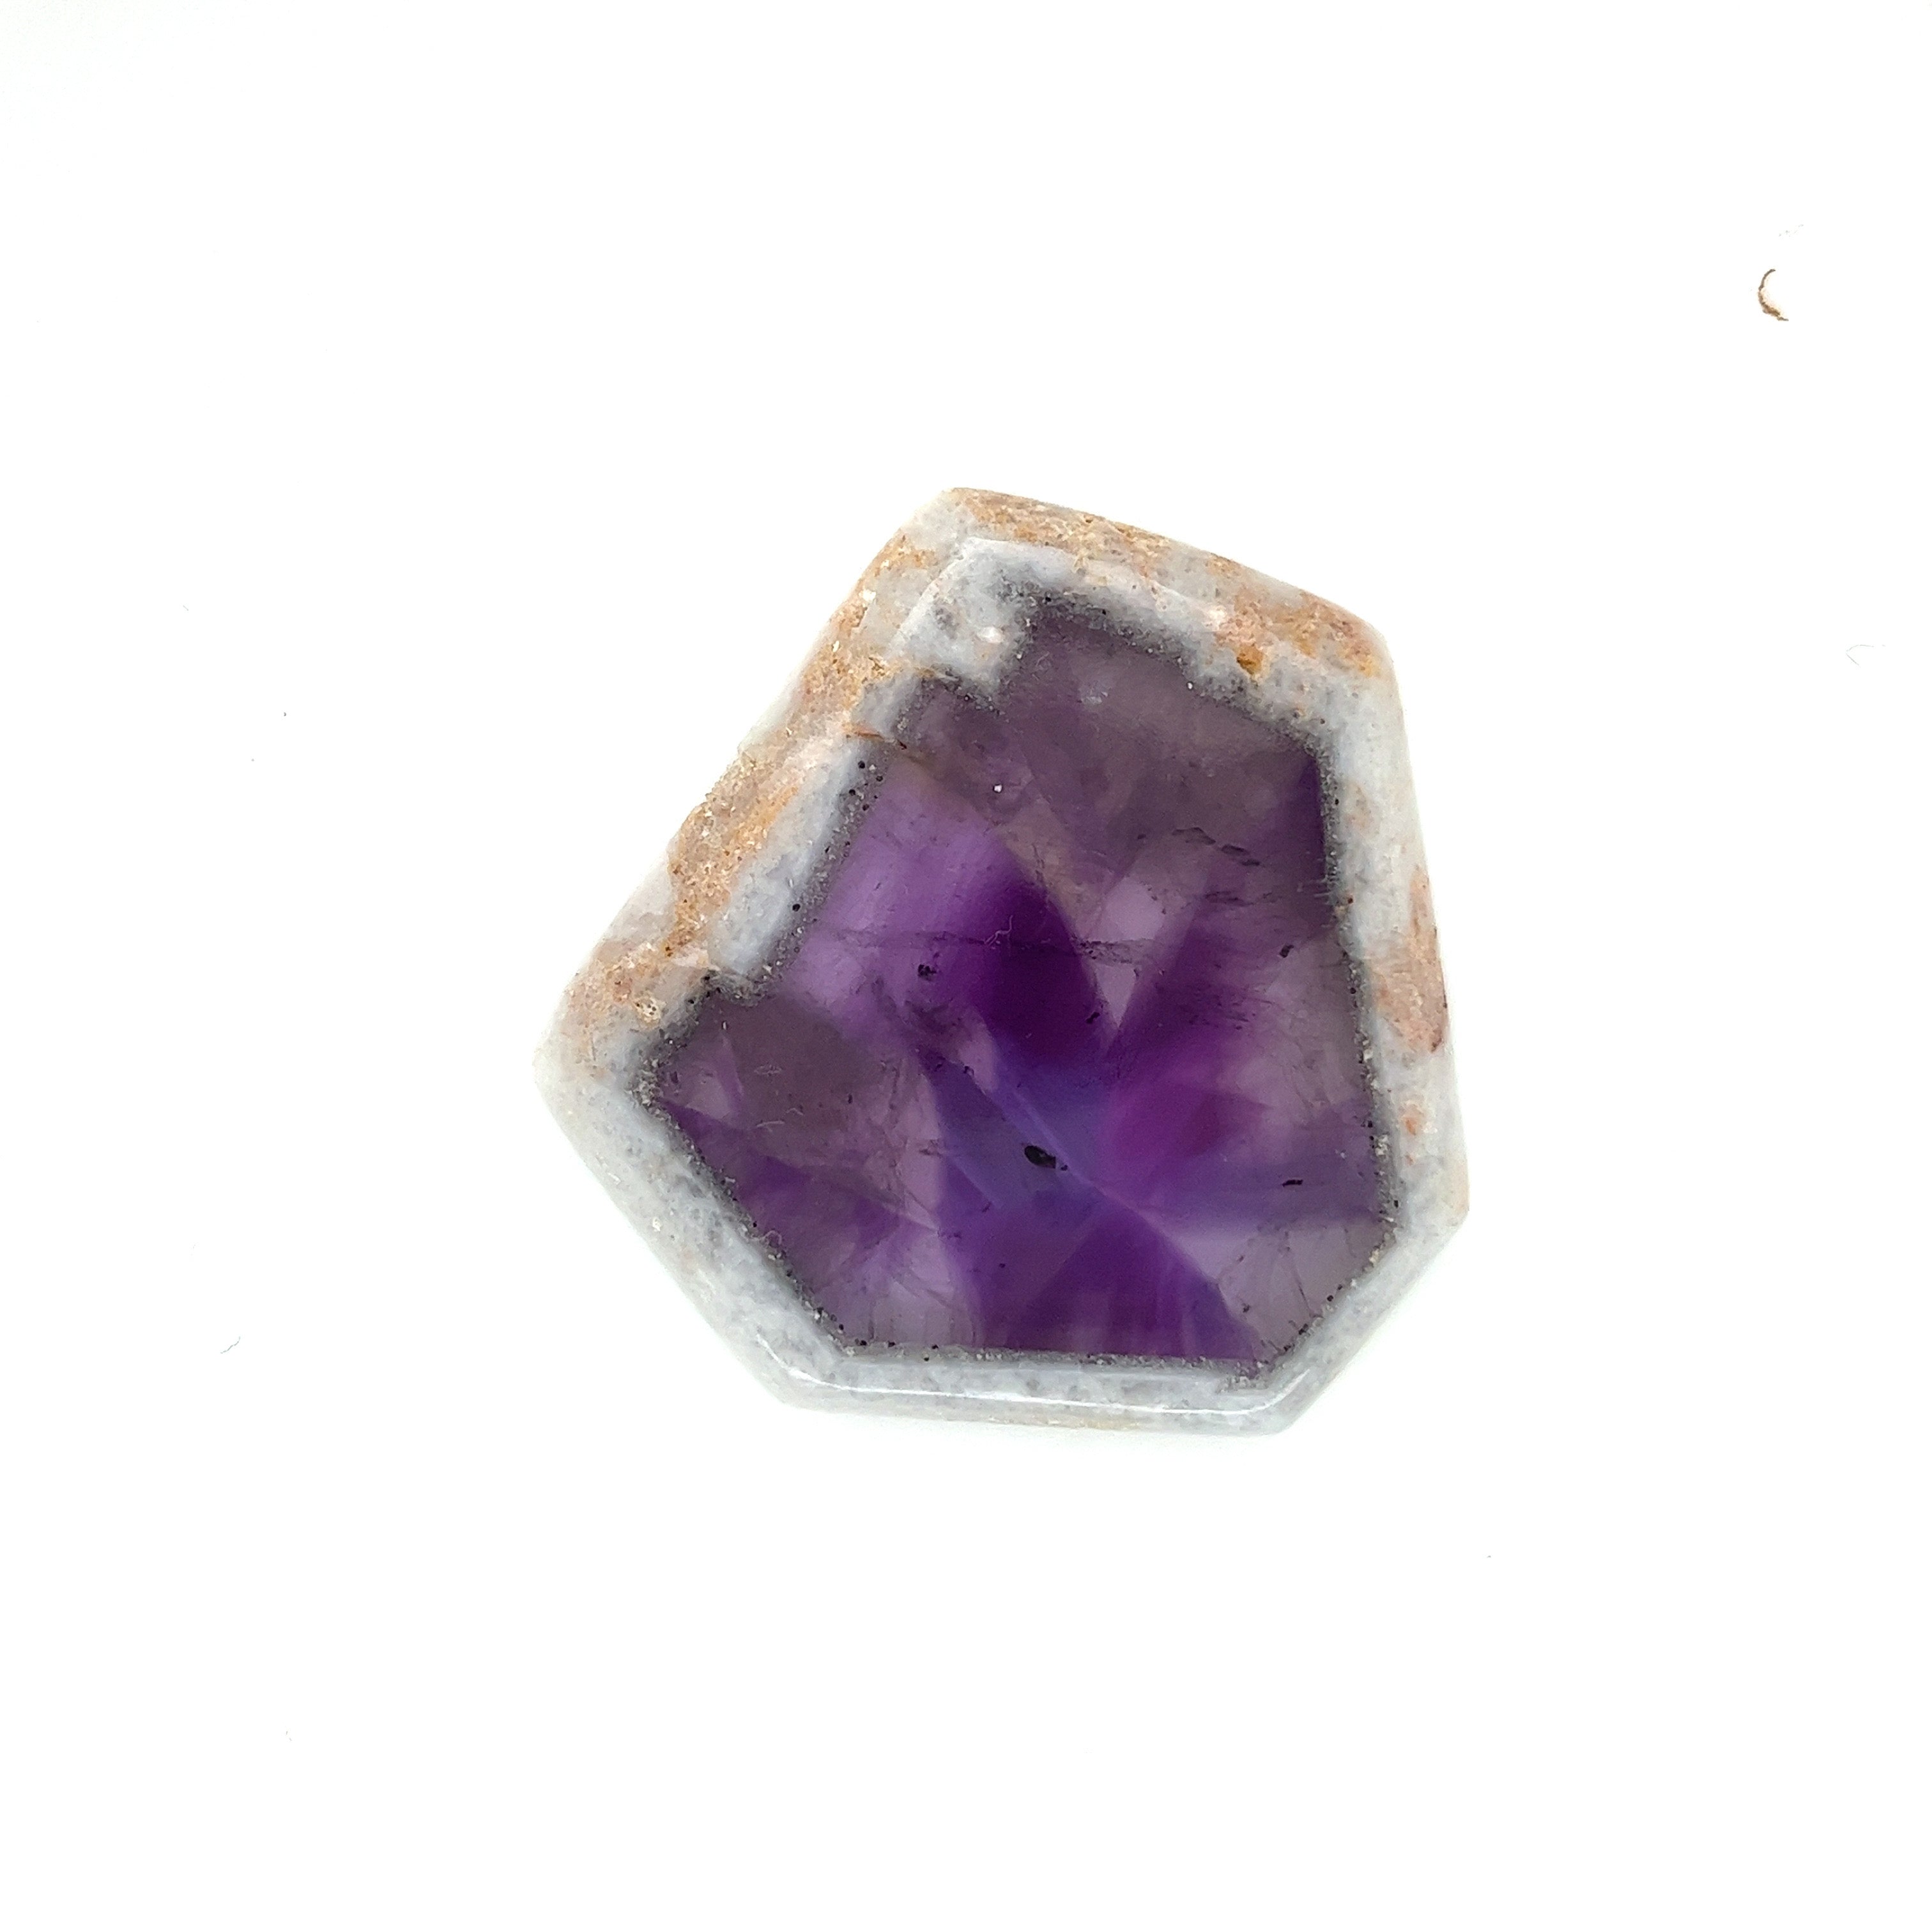 Trapiche Amethyst; Natural Untreated India Amethyst Slice, 21 grams - Mark Oliver Gems